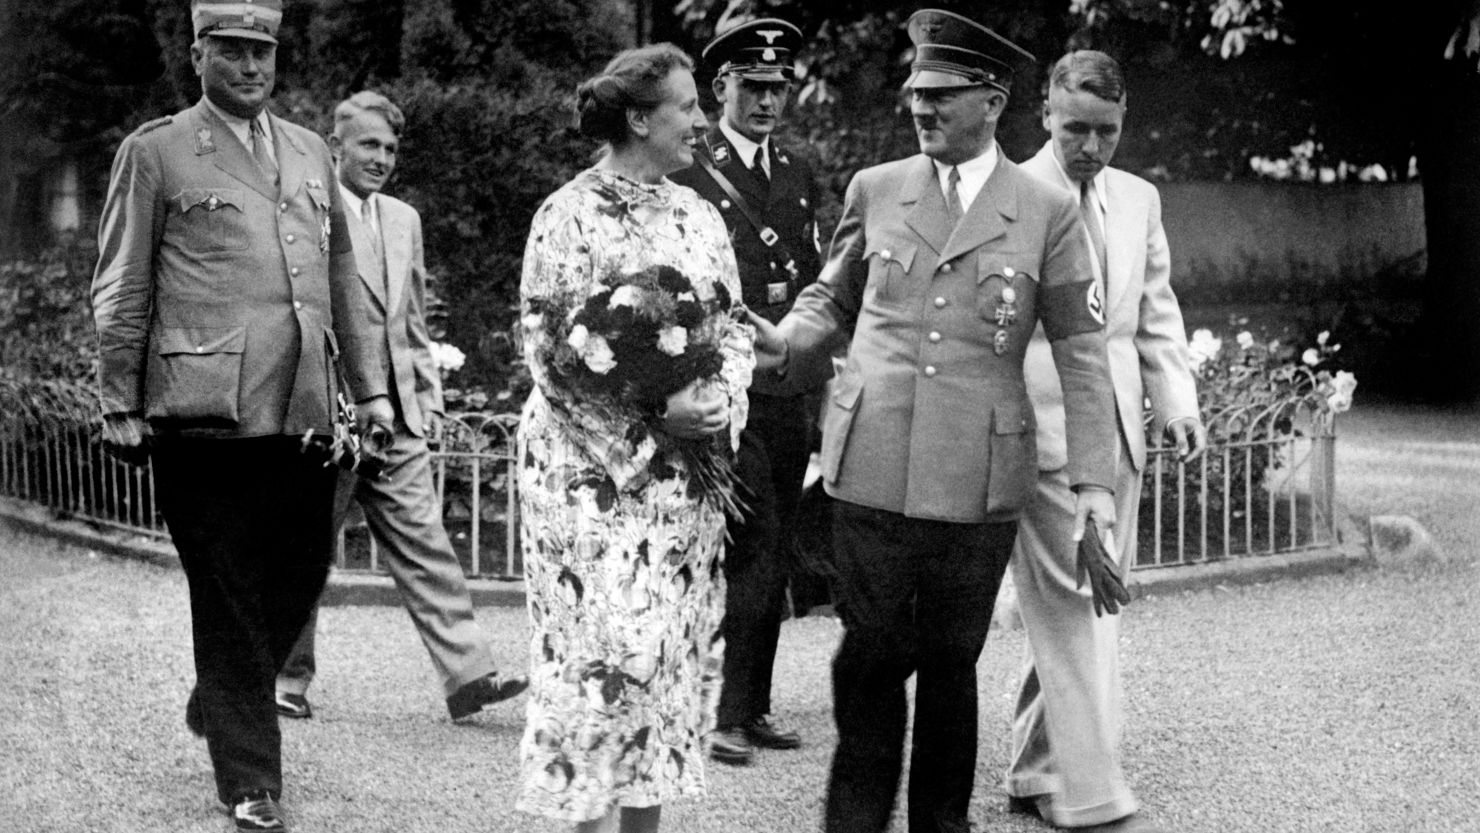 German Chancellor and Nazi Dictator Adolf Hitler, second right, talking with Winifred Wagner in the park of the Wahnfried Villa in Bayreuth in summer 1937. Winifred Wagner was the daughter-in-law of Richard Wagner and director of the Bayreuth music festival. 